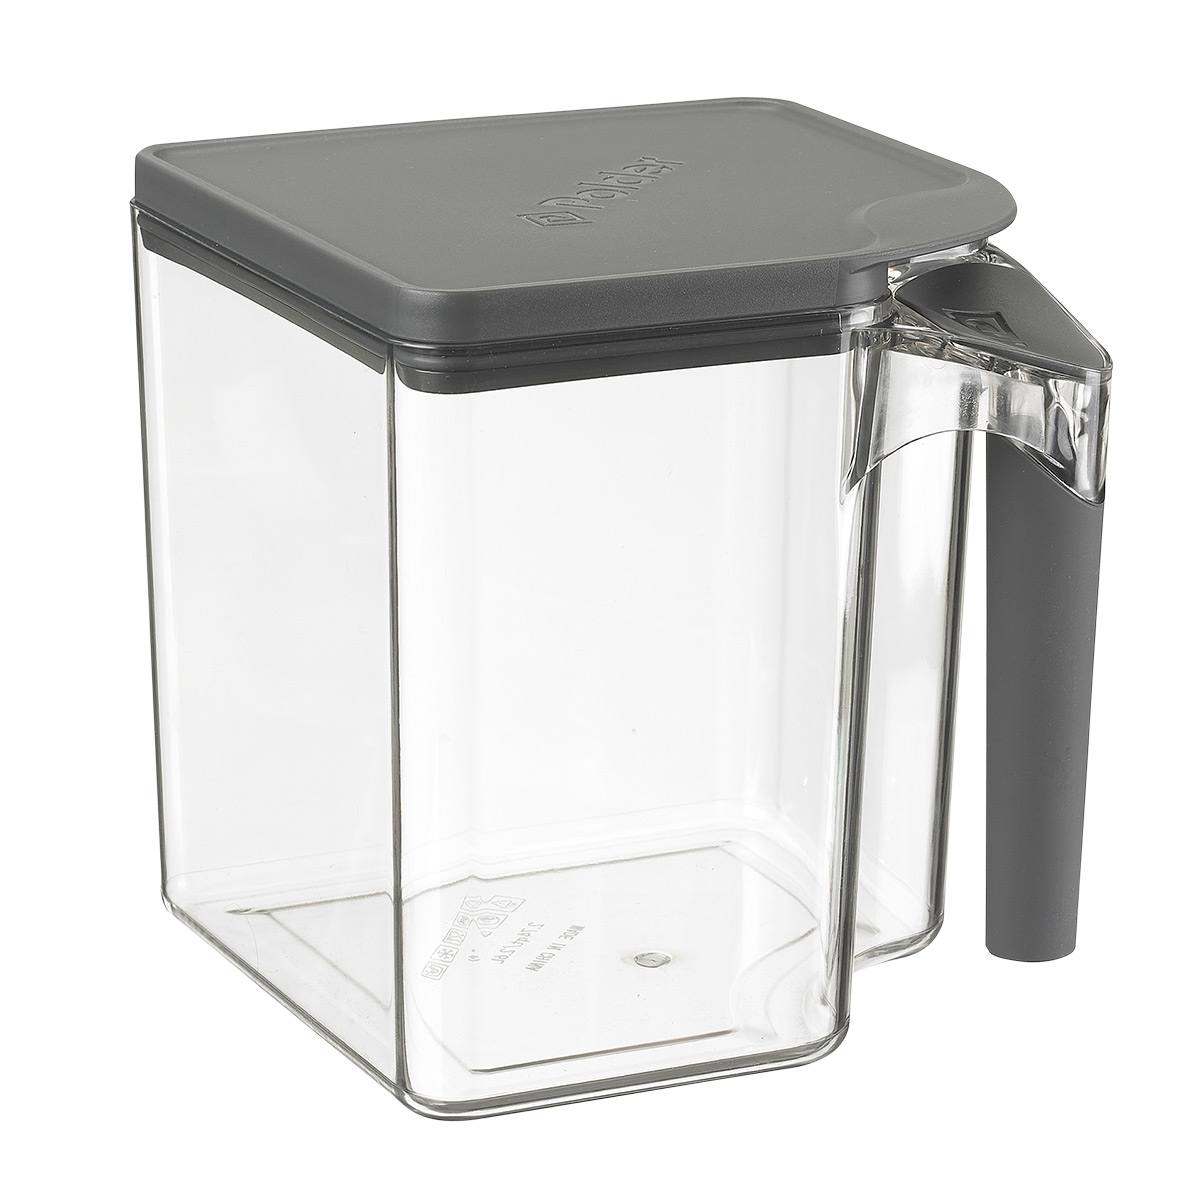 https://www.containerstore.com/catalogimages/482177/10093750-polder-ven1.jpg